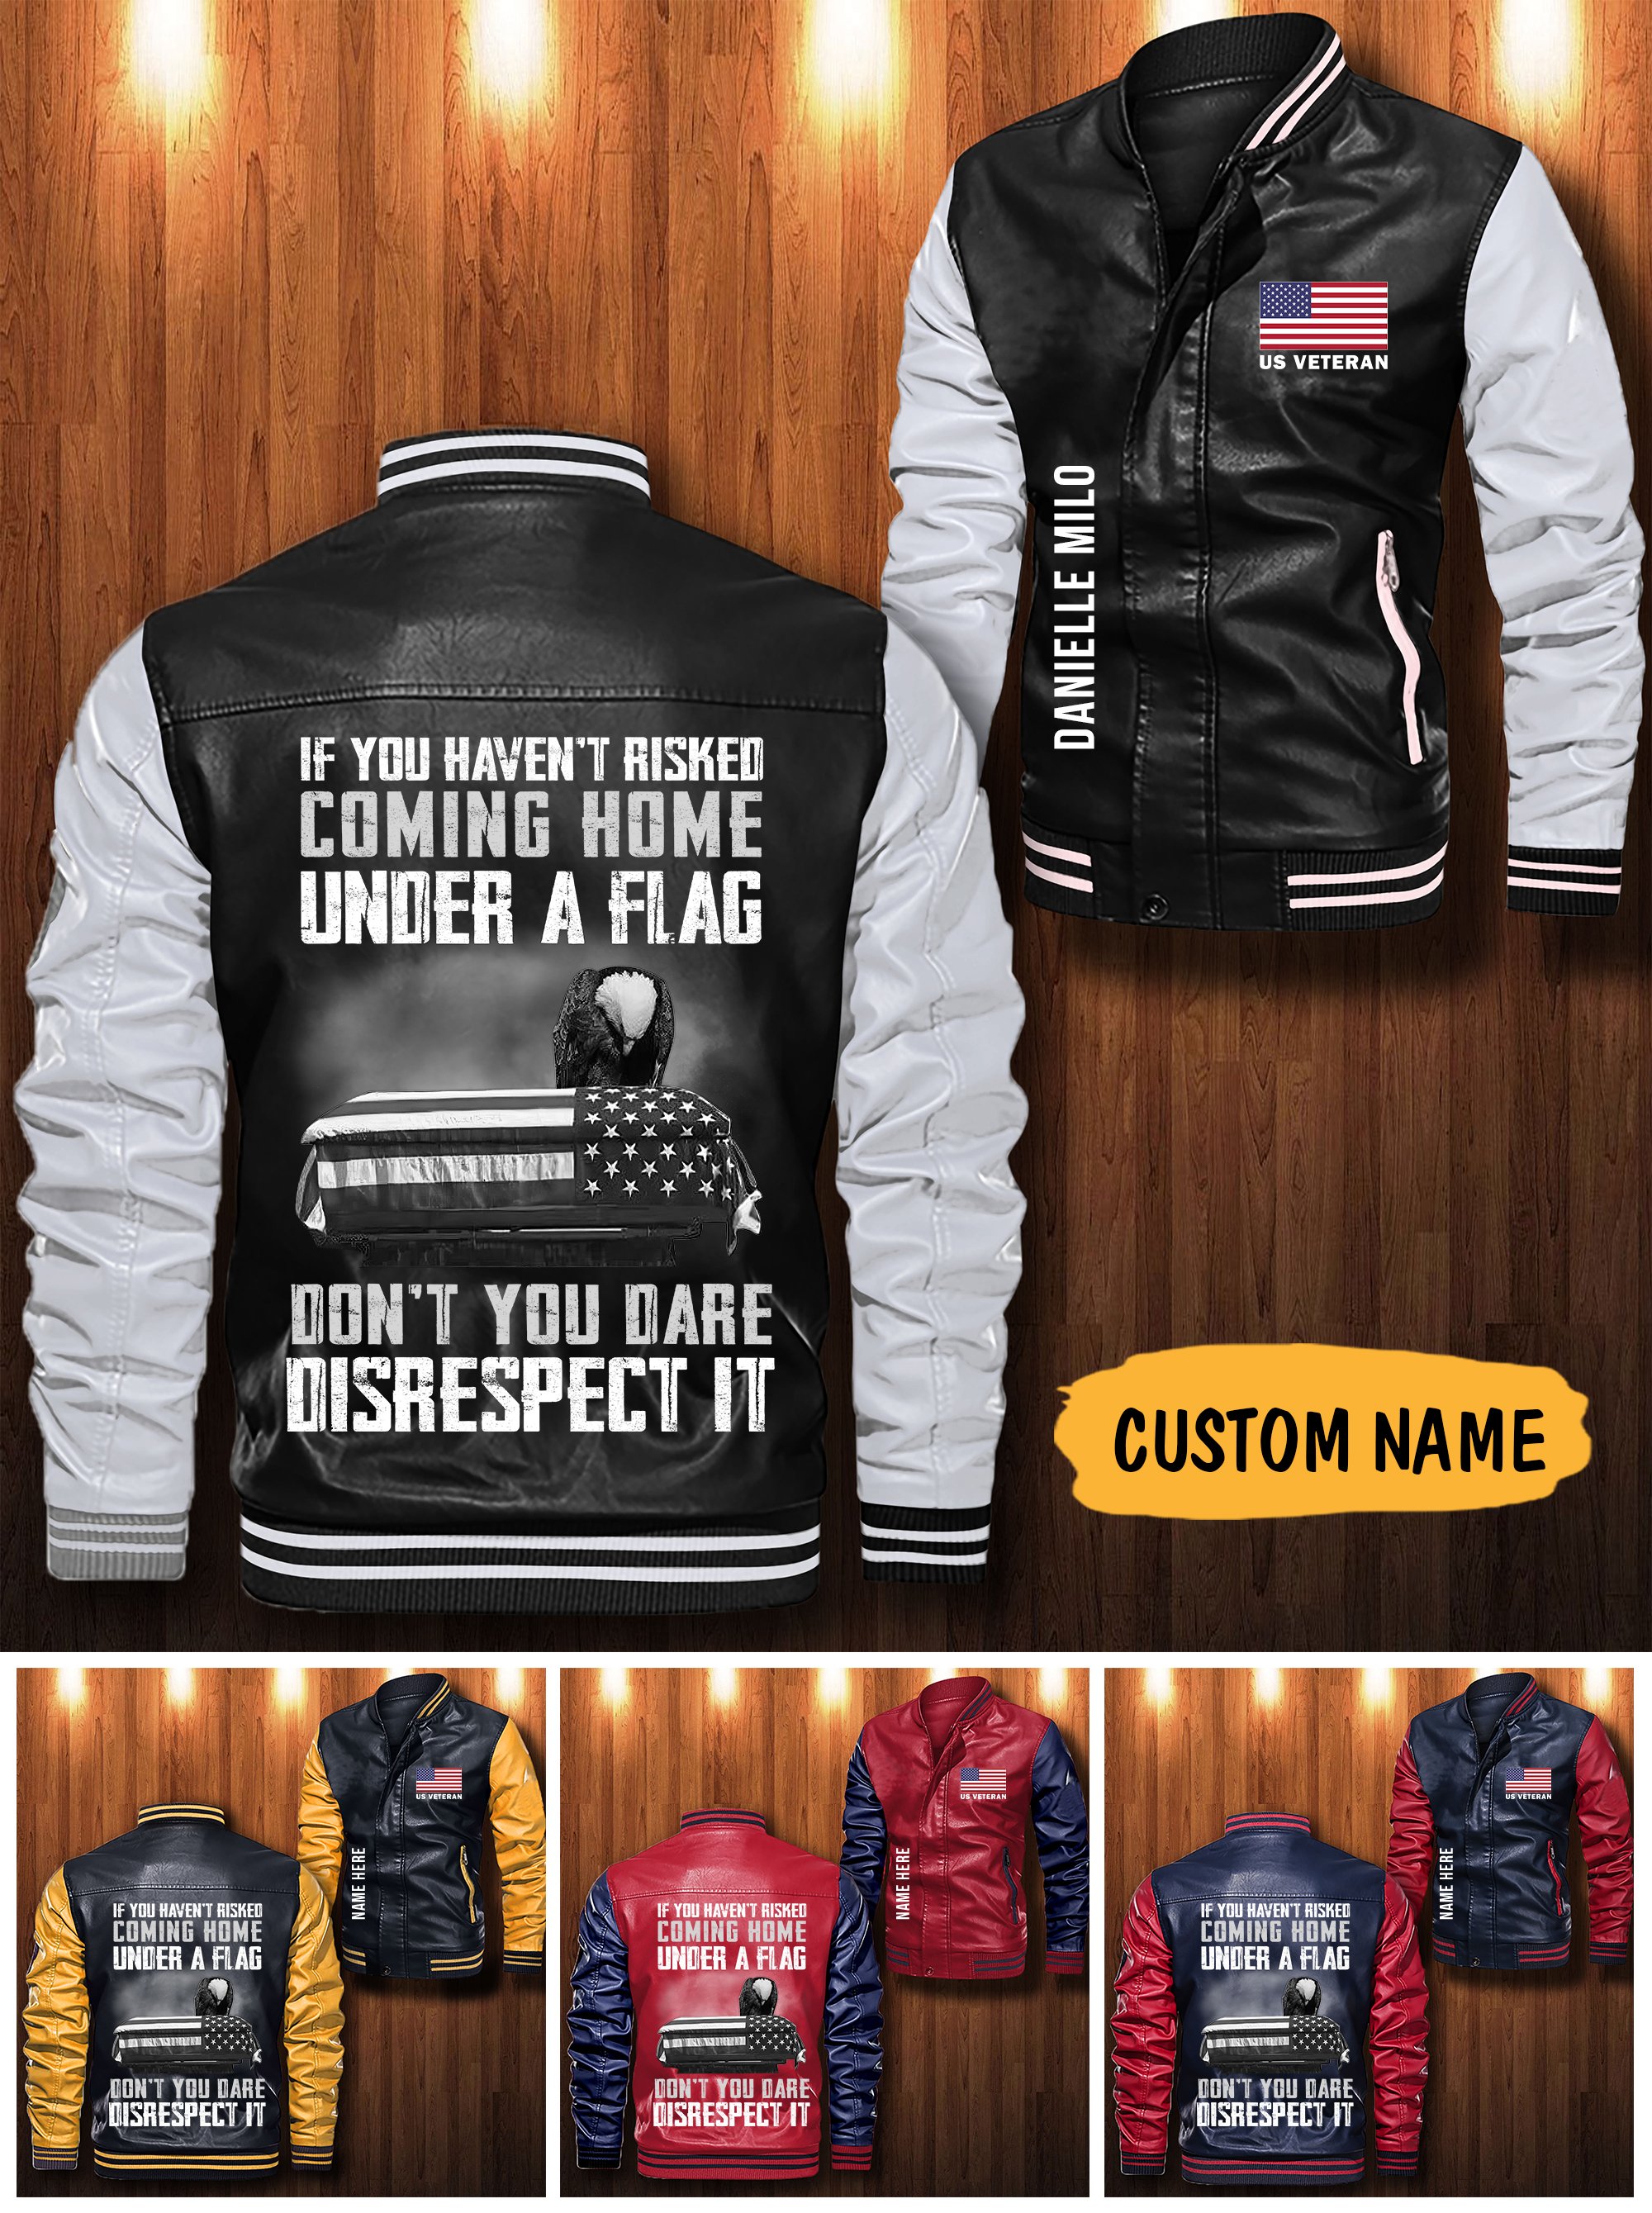 US veteran custom personalized Leather Bomber Jacket – LIMITED EDITION